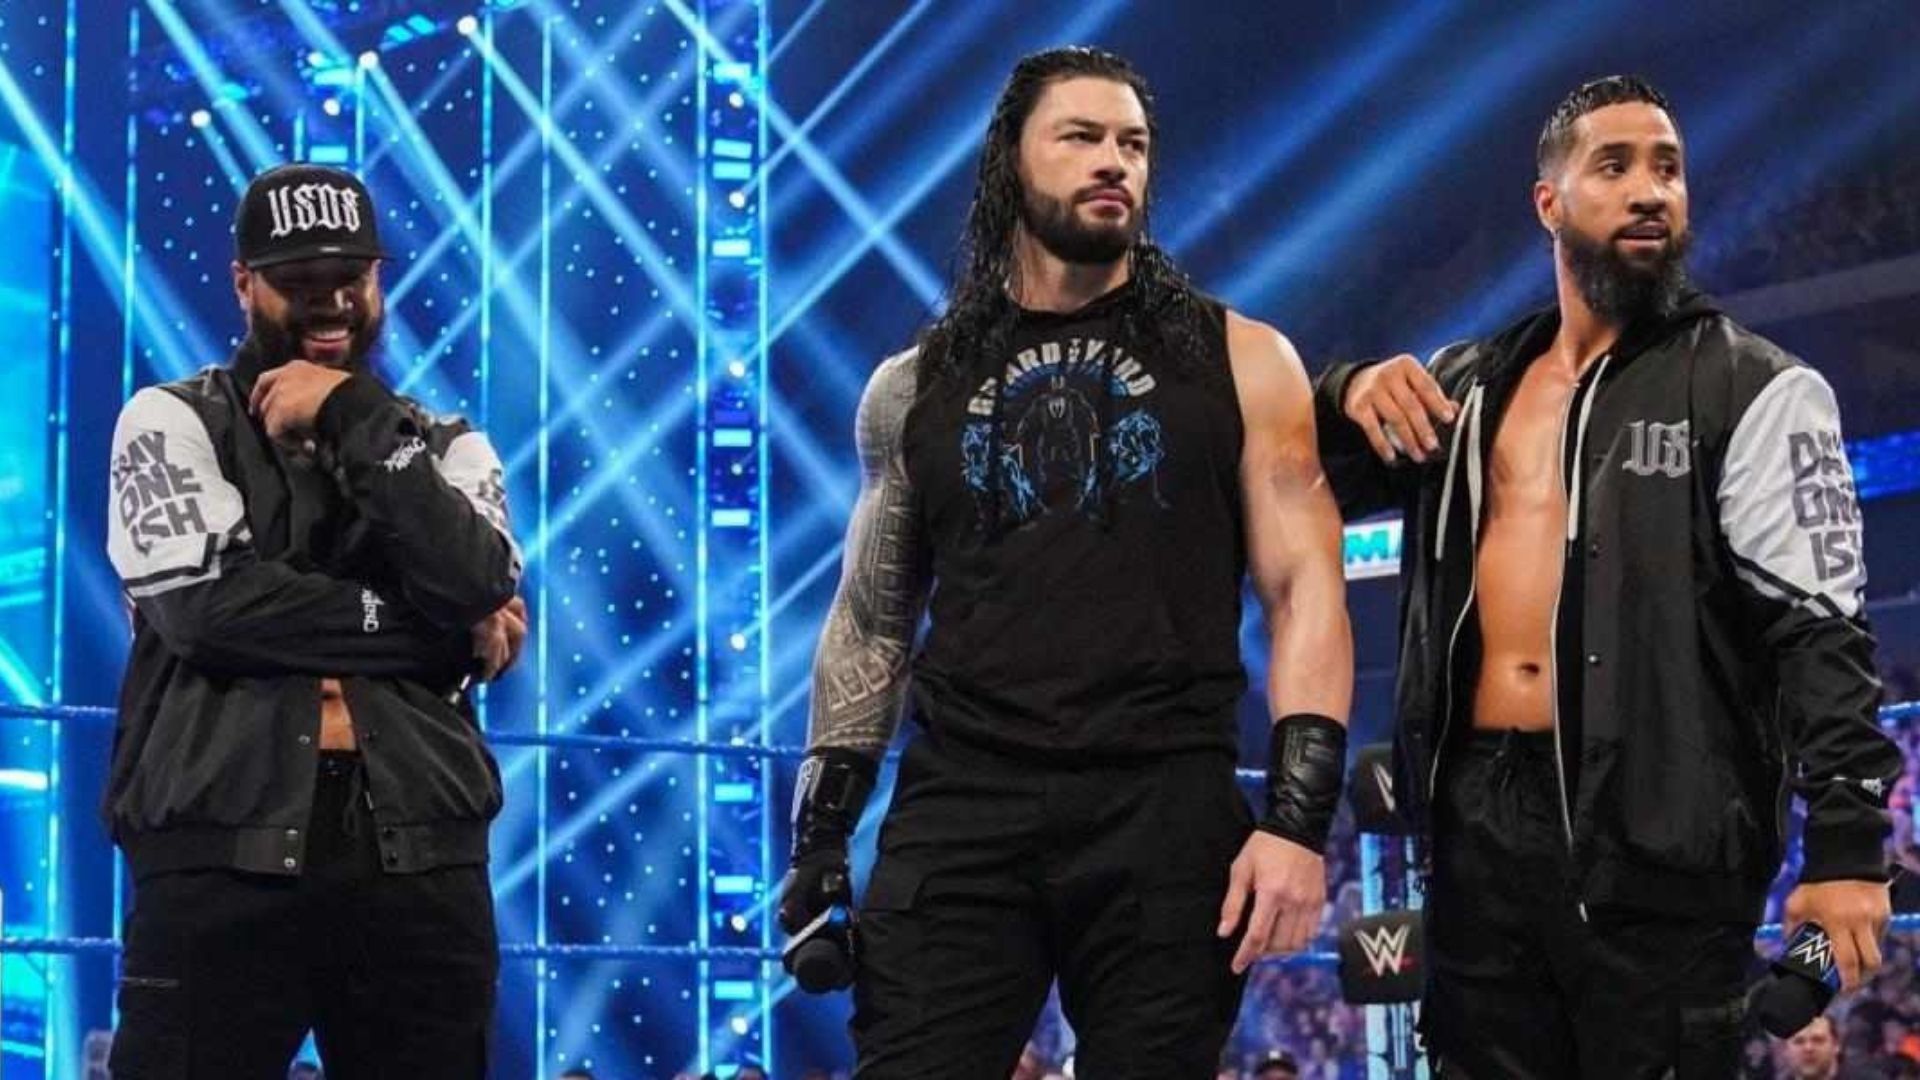 WWE Superstars Roman Reigns and The Usos